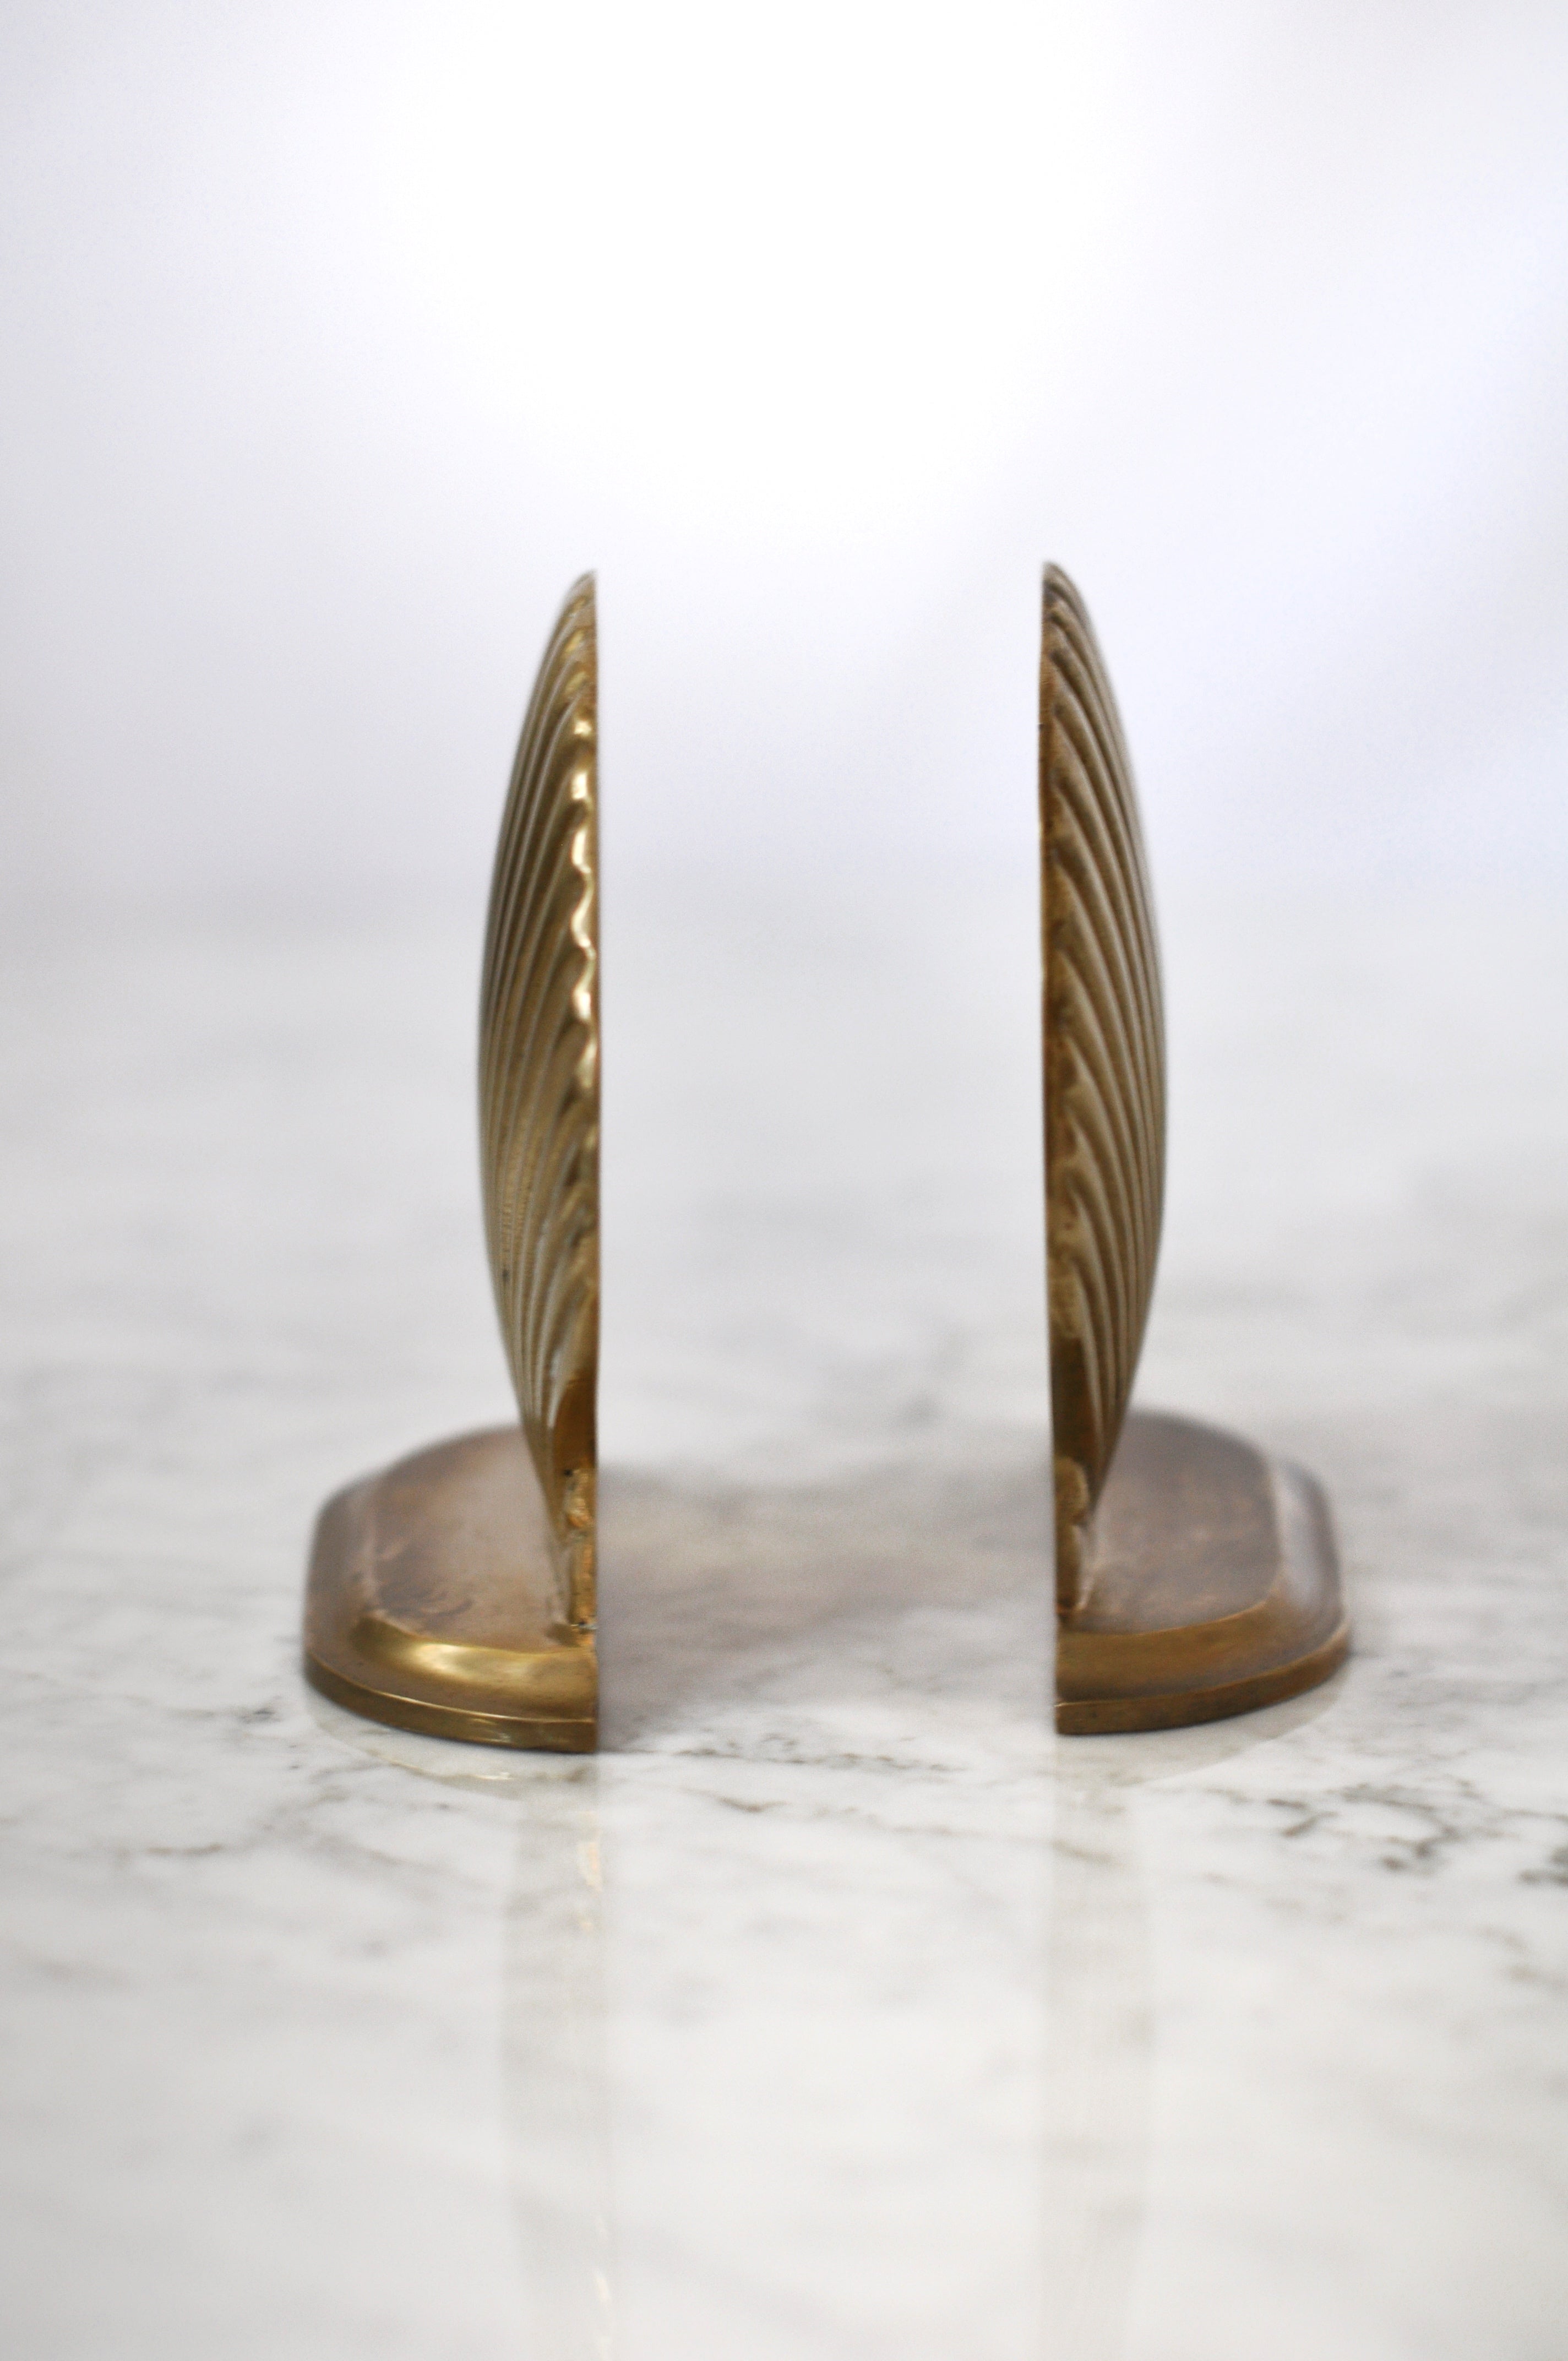 1970s Brass Shell Bookends - a Pair - FREE SHIPPING!